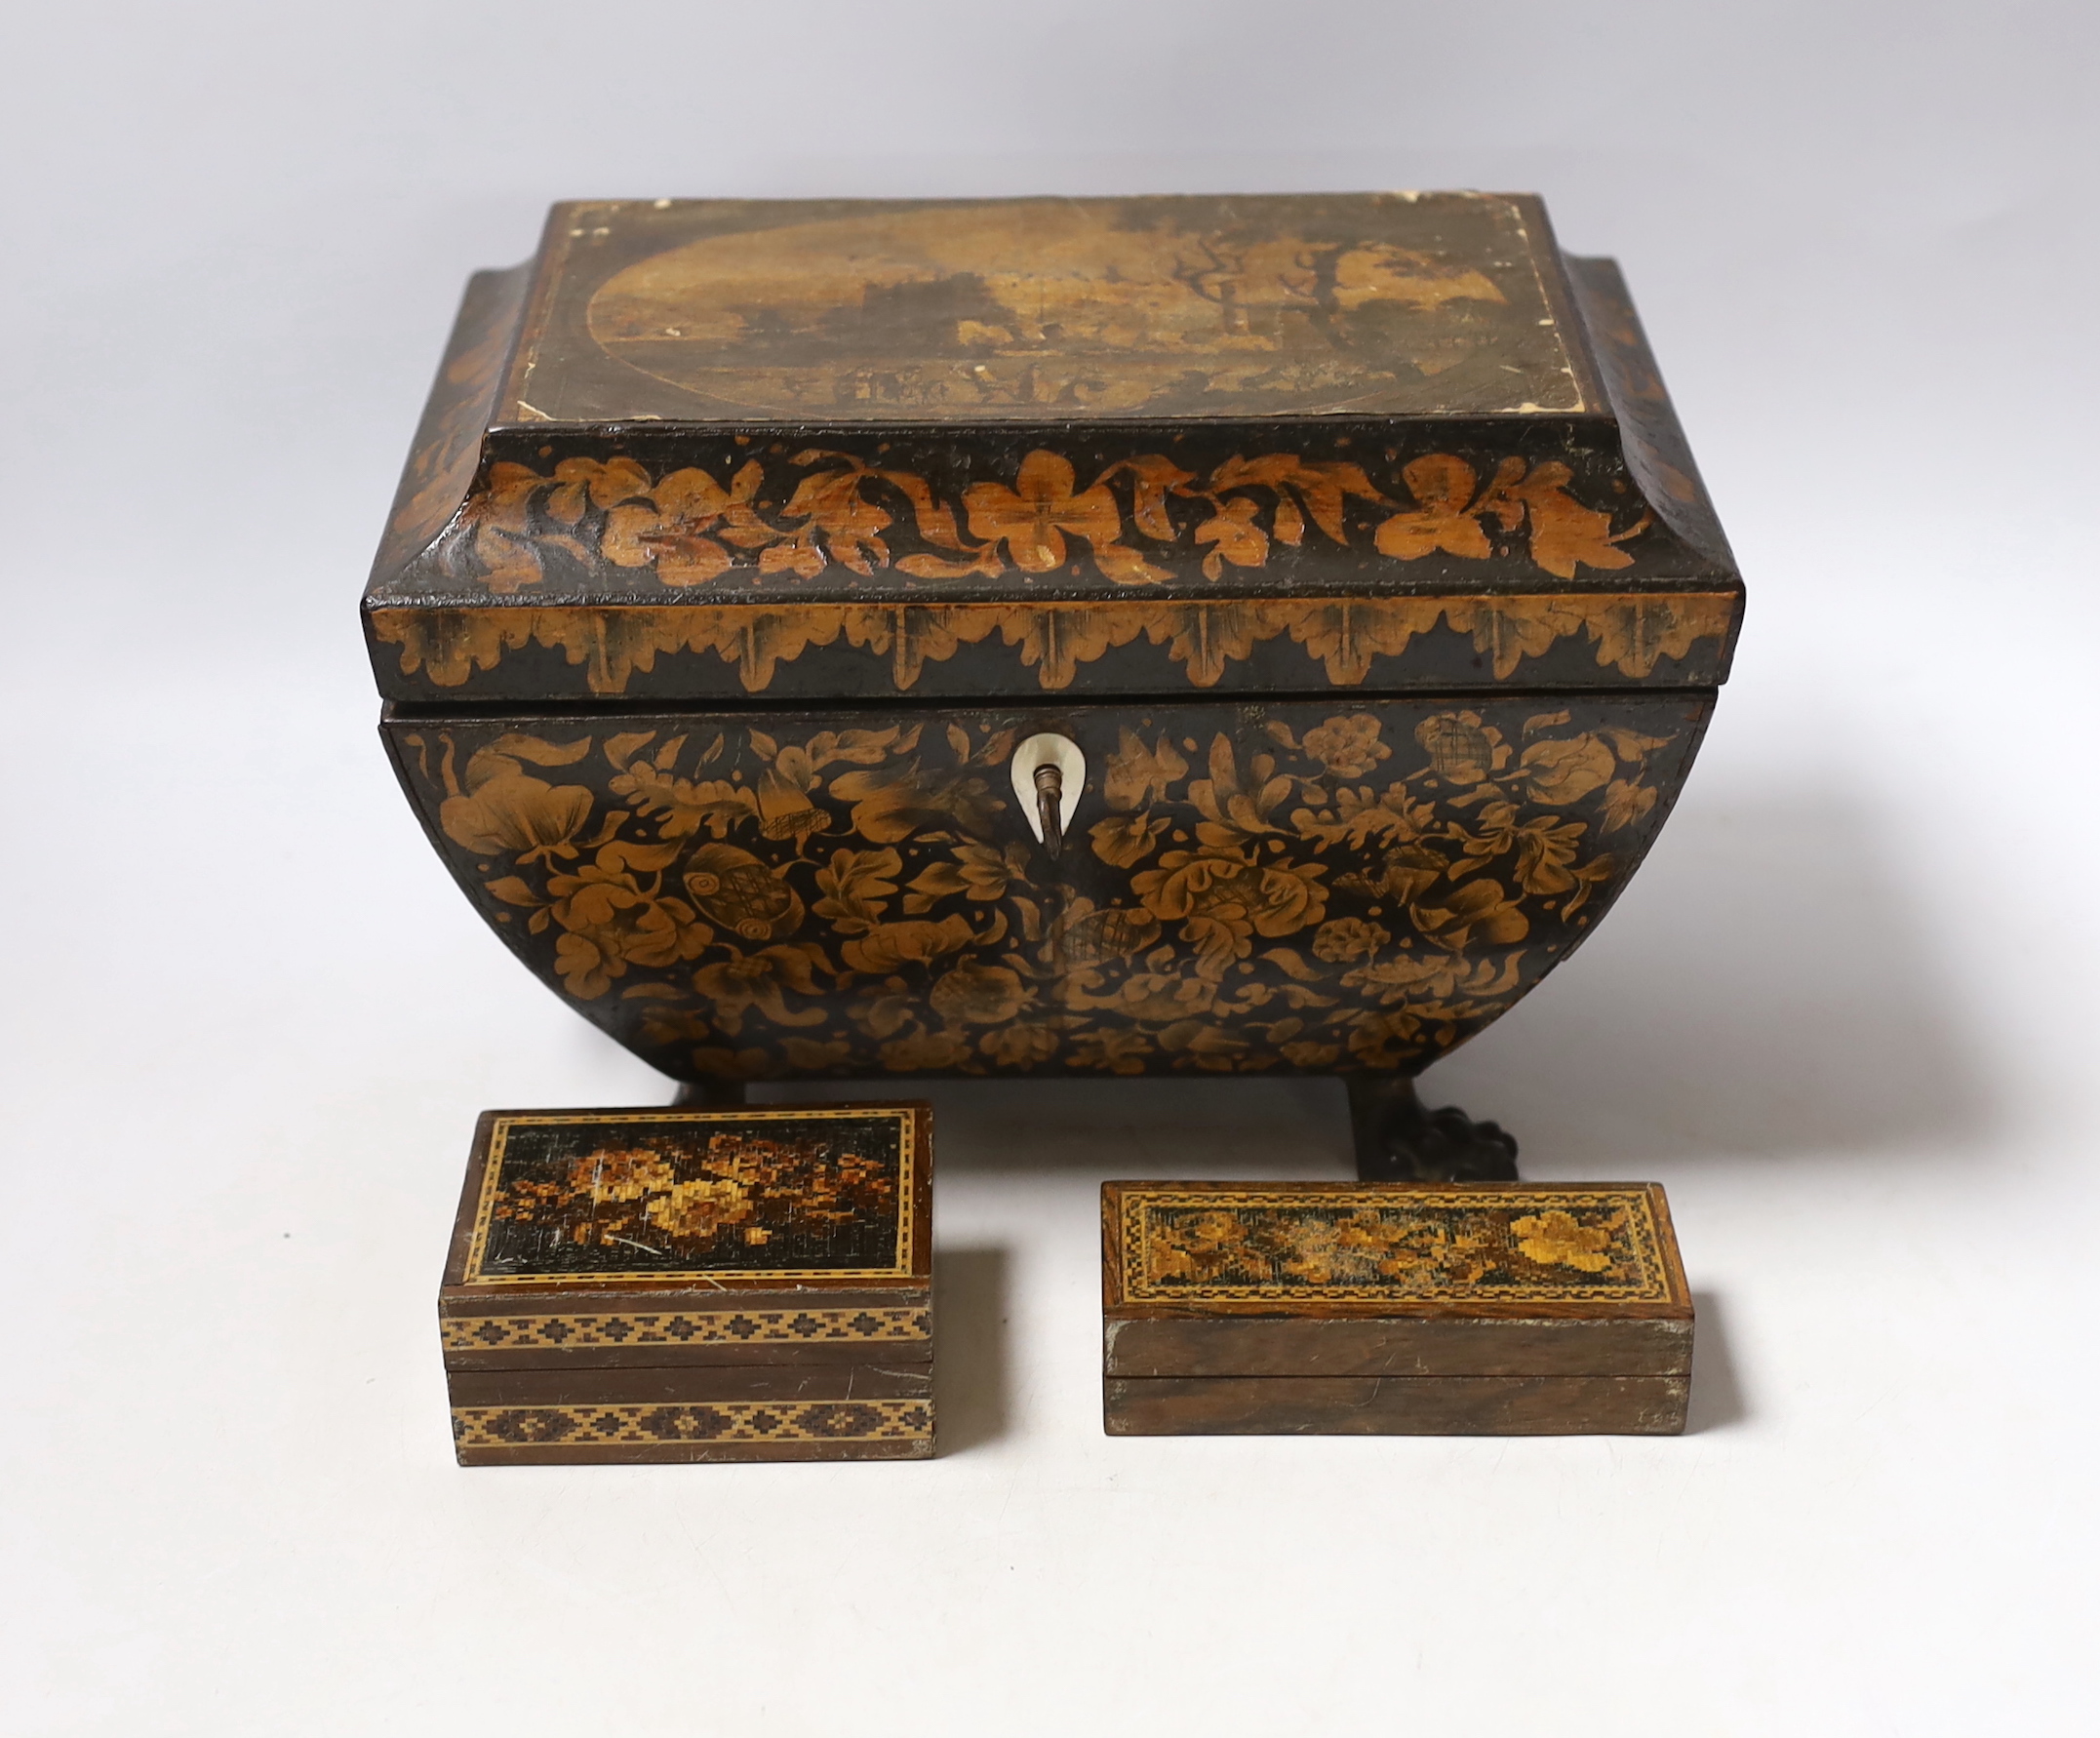 A Regency penwork tea caddy, the cover inset with an engraving of figures by a castle, 23.5 x 16 x 16cm and two small Tunbridge ware boxes